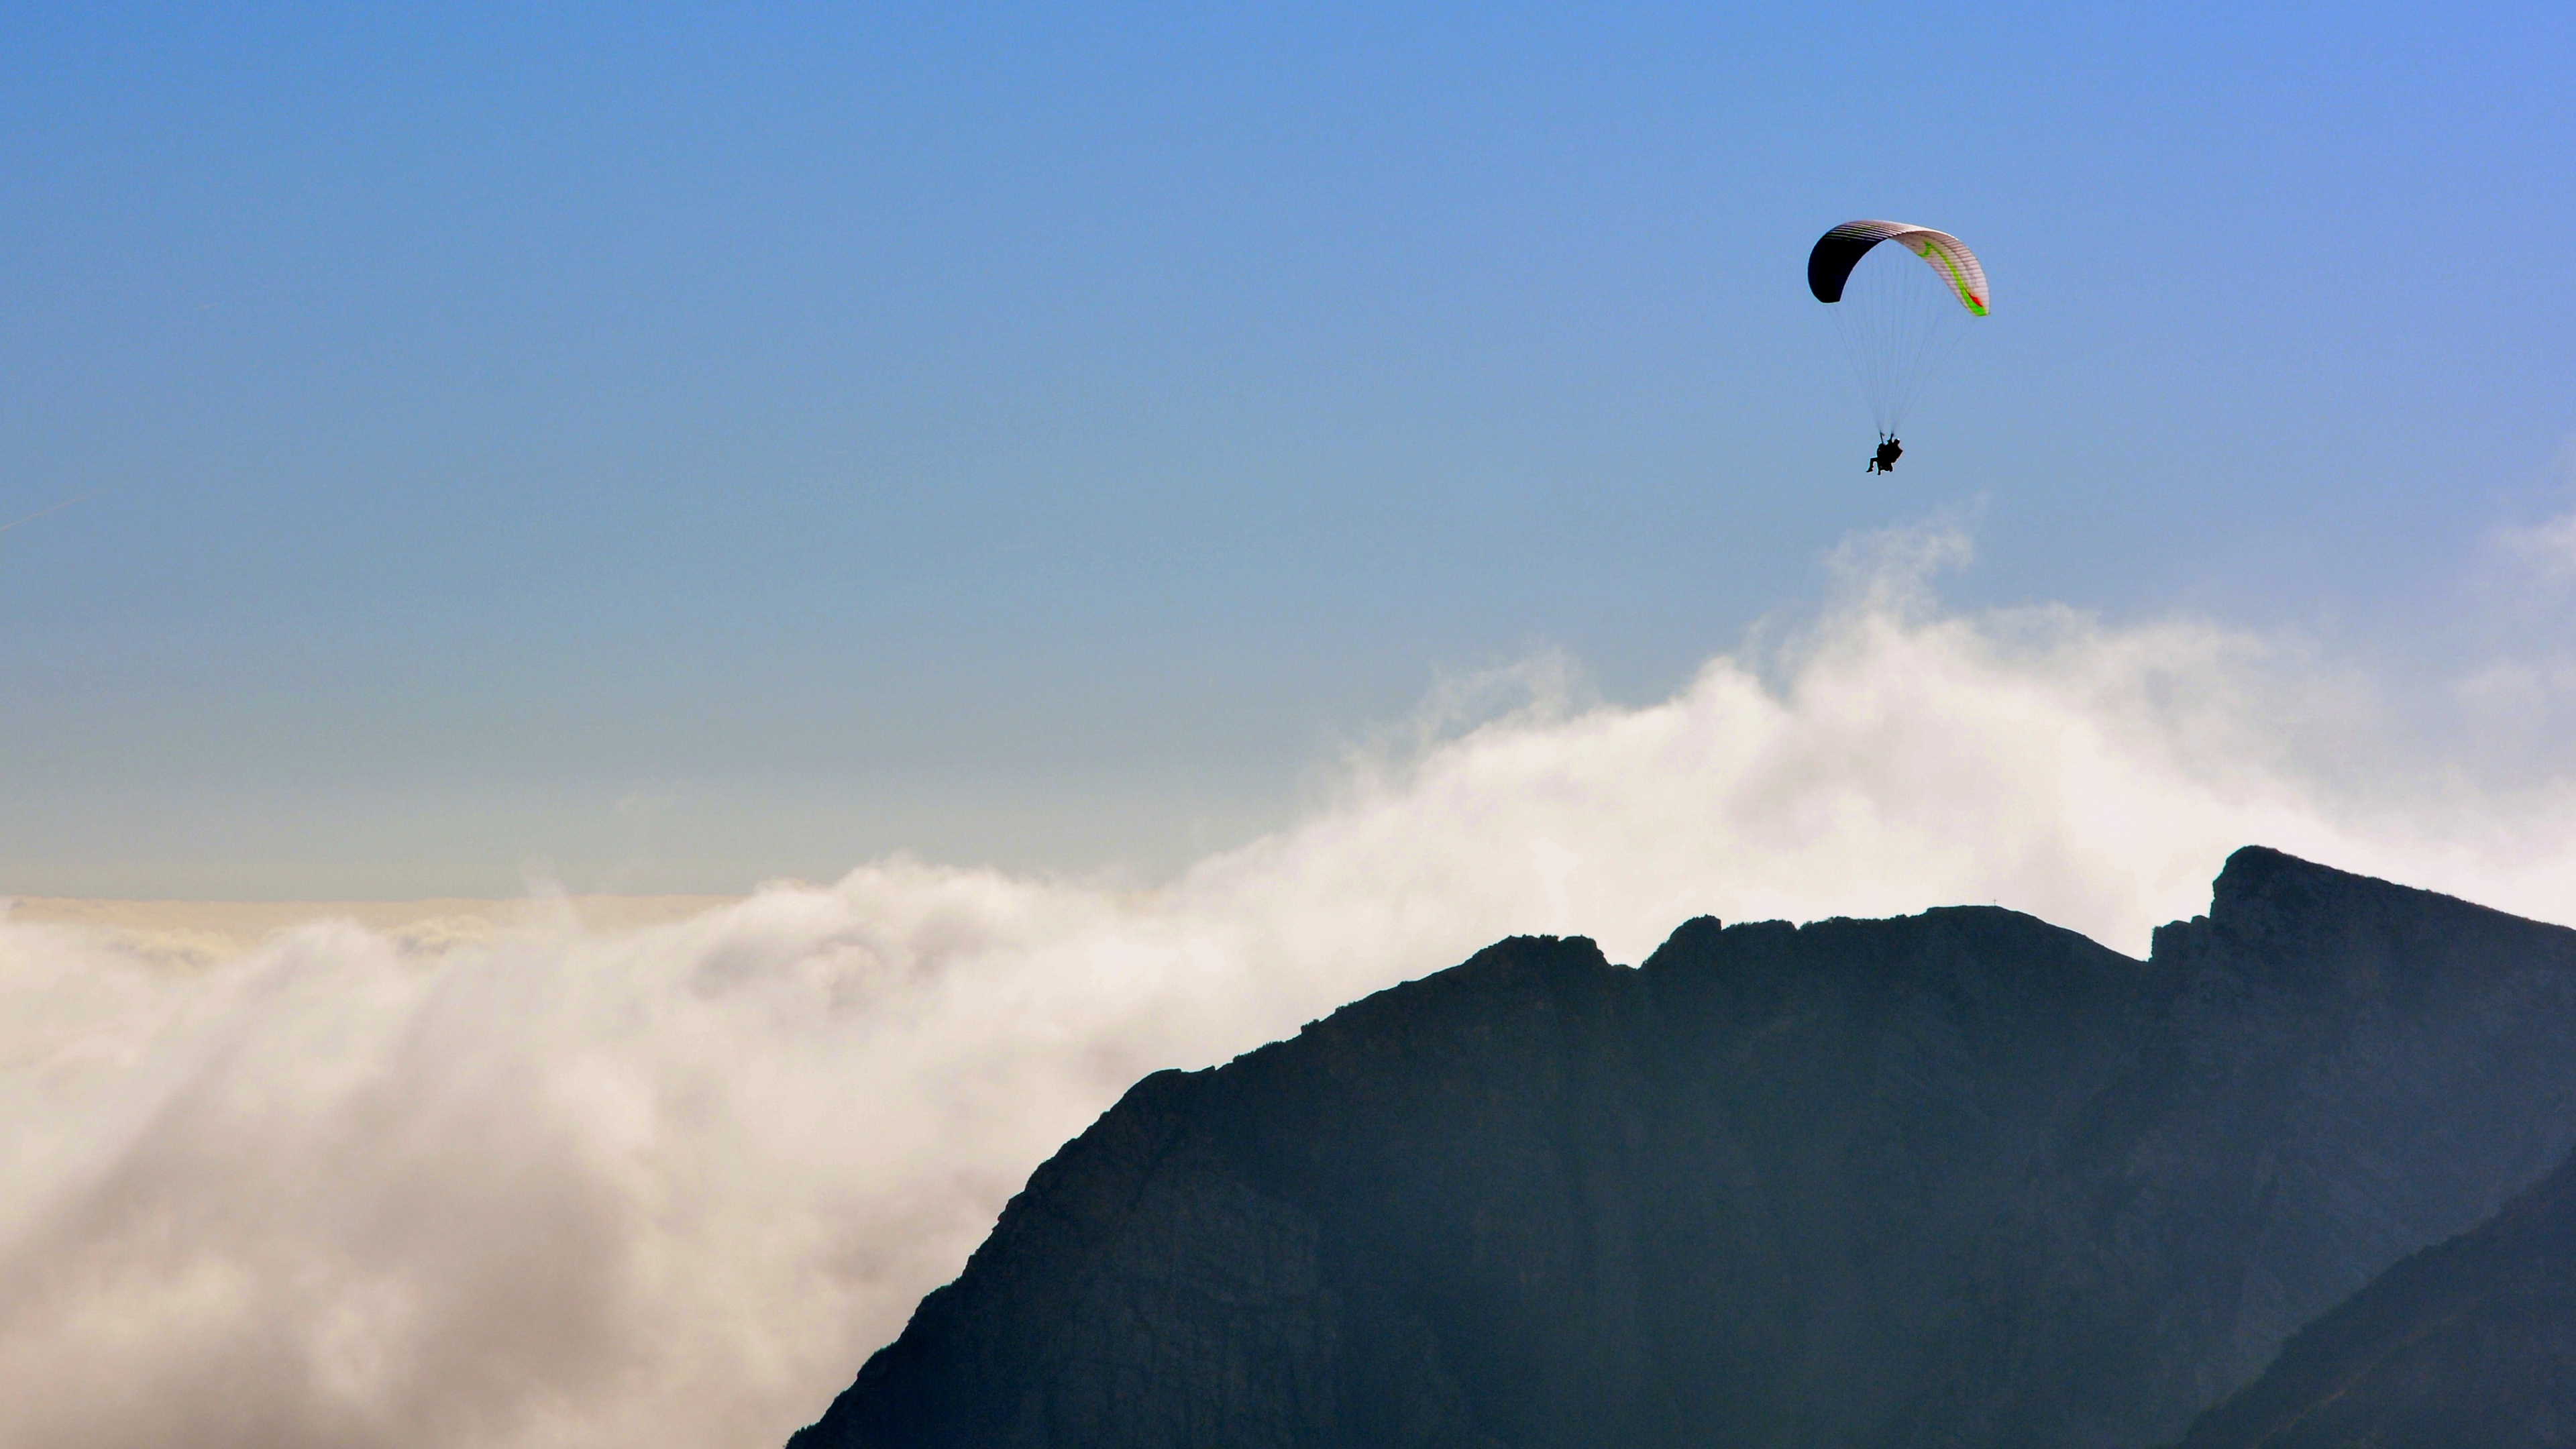 Person Riding Parachute Over Mountain. Wallpaper in 3840x2160 Resolution